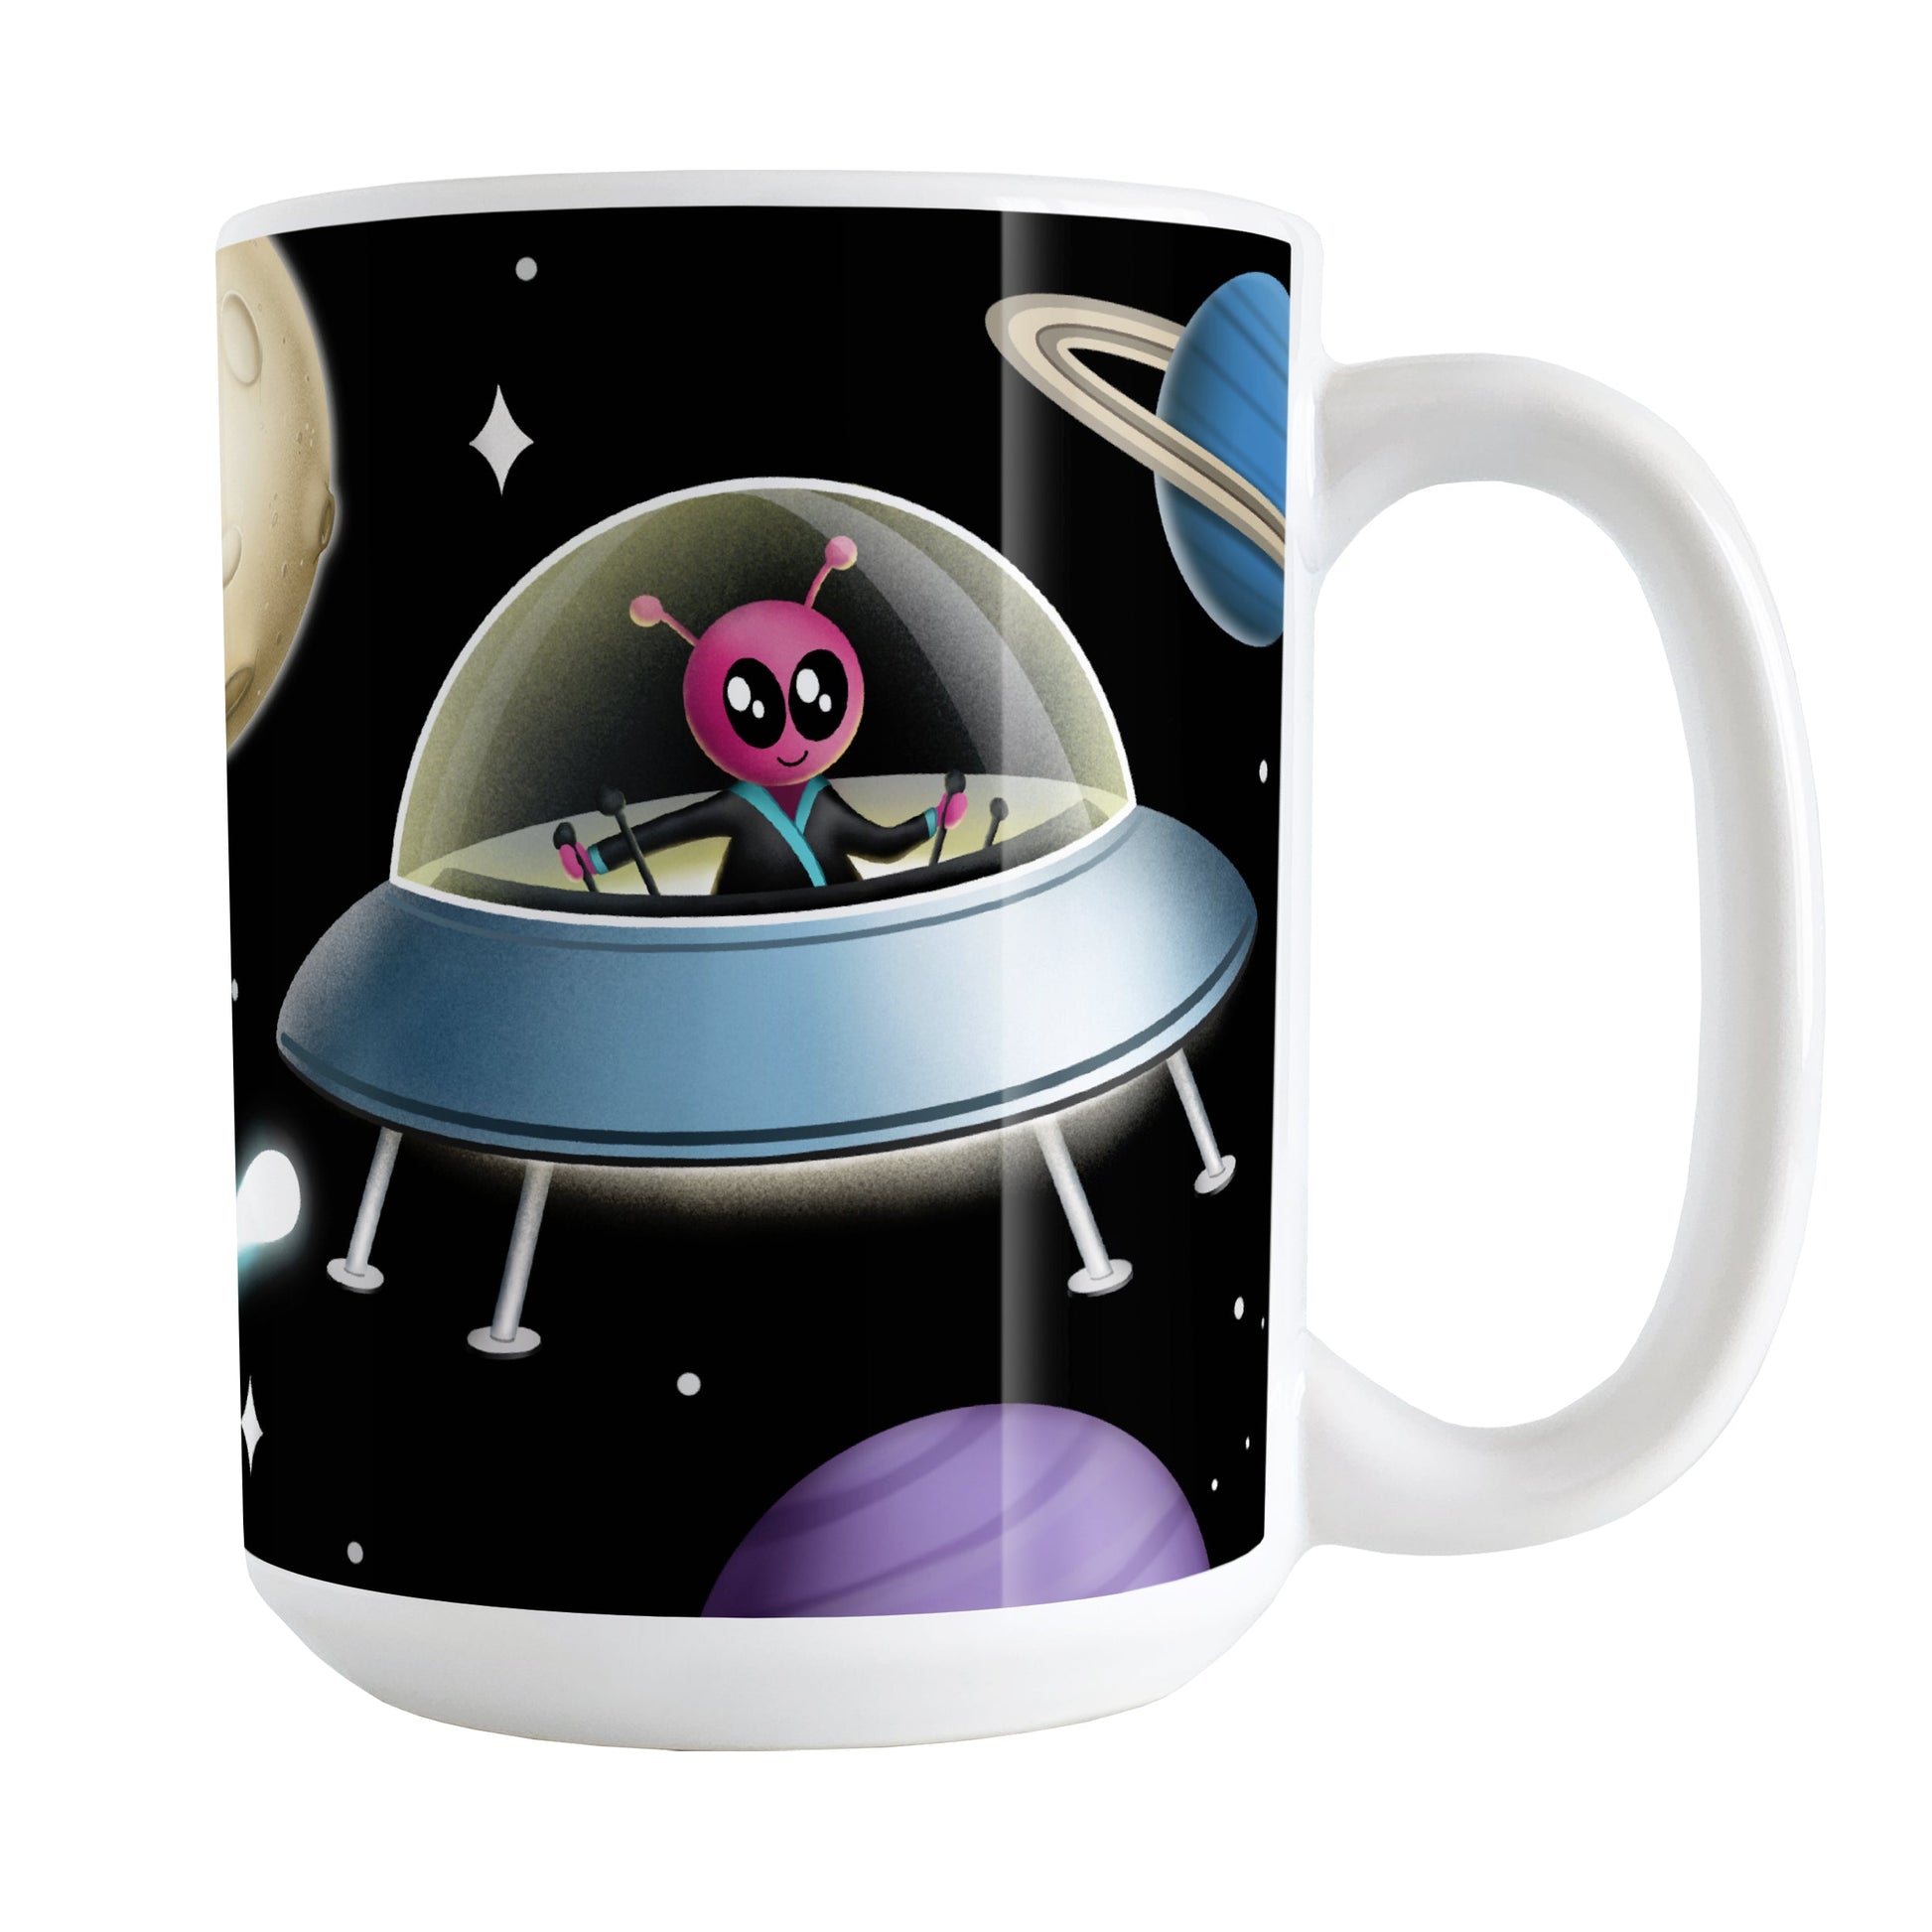 Galaxy Pink Alien Spaceship Mug (15oz) at Amy's Coffee Mugs. A galaxy spaceship mug designed with an illustration of a pink alien in a spaceship in a galaxy design with planets, stars, comets, and a moon over a black background.